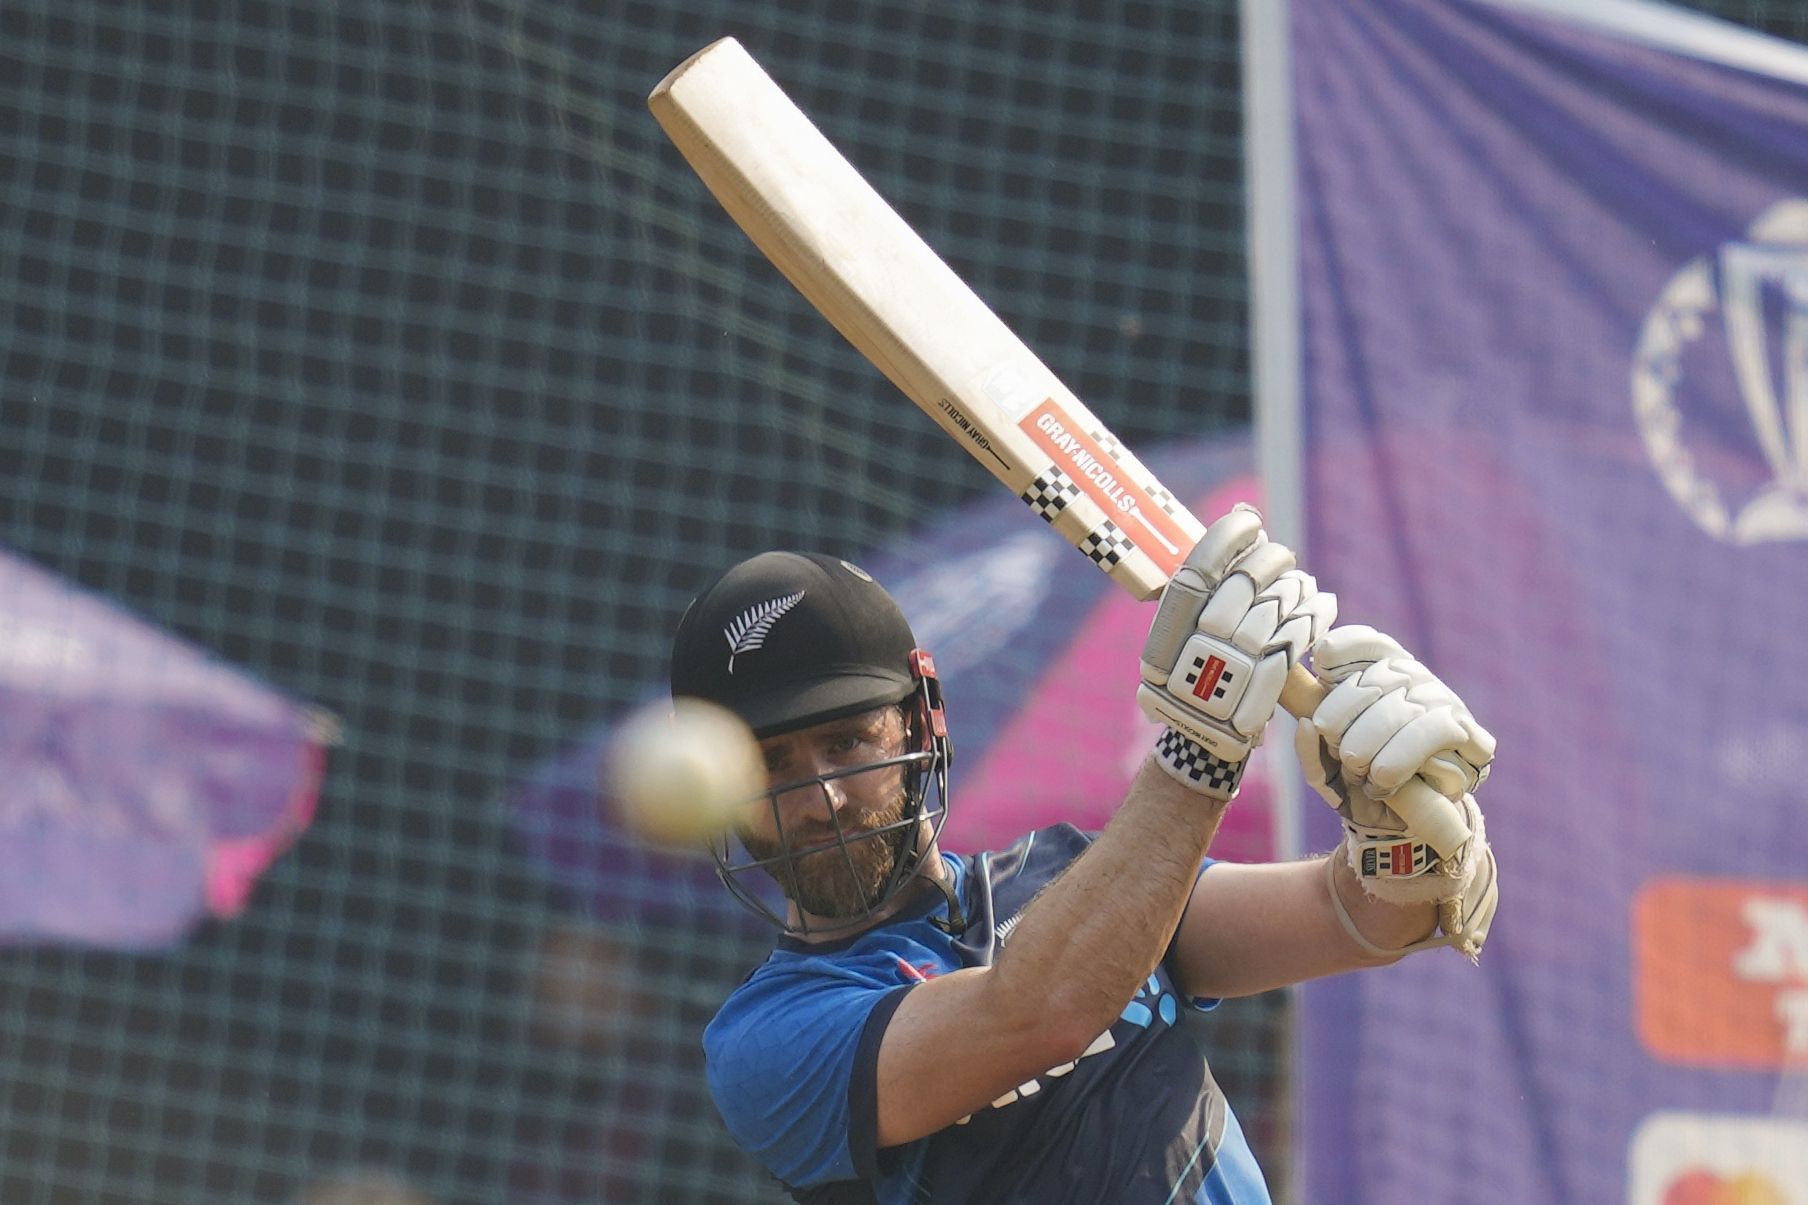 Kane Williamson led New Zealand in the 2008 U19 World Cup as well.